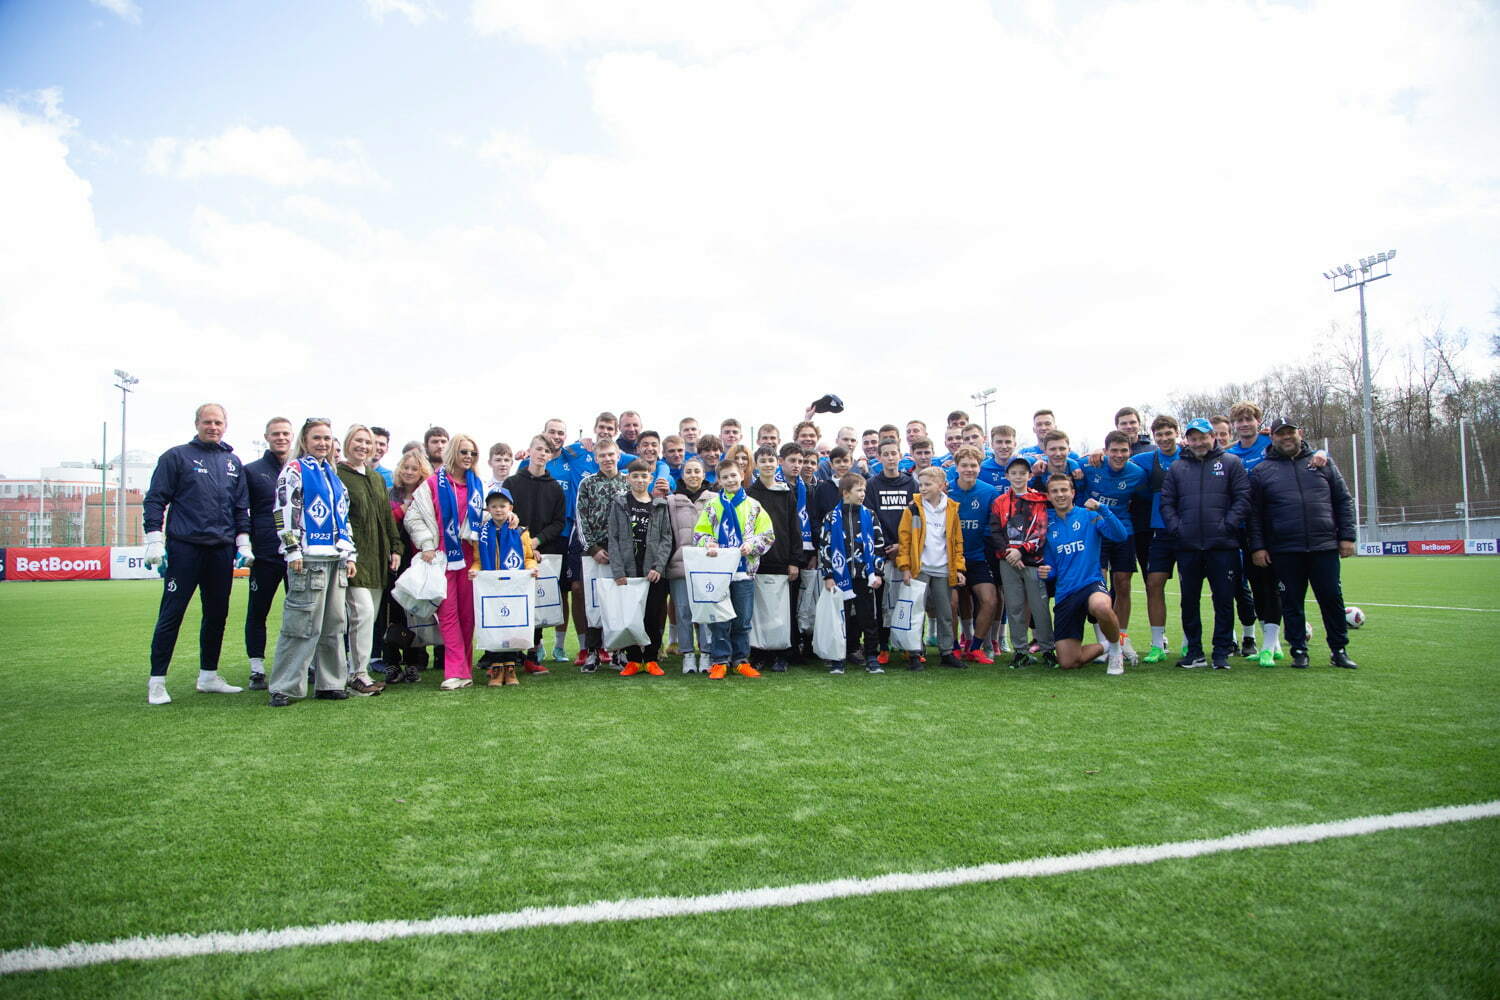 "Dynamo" Day and VTB Bank at the Novogorsk base for children from the Ryazan region